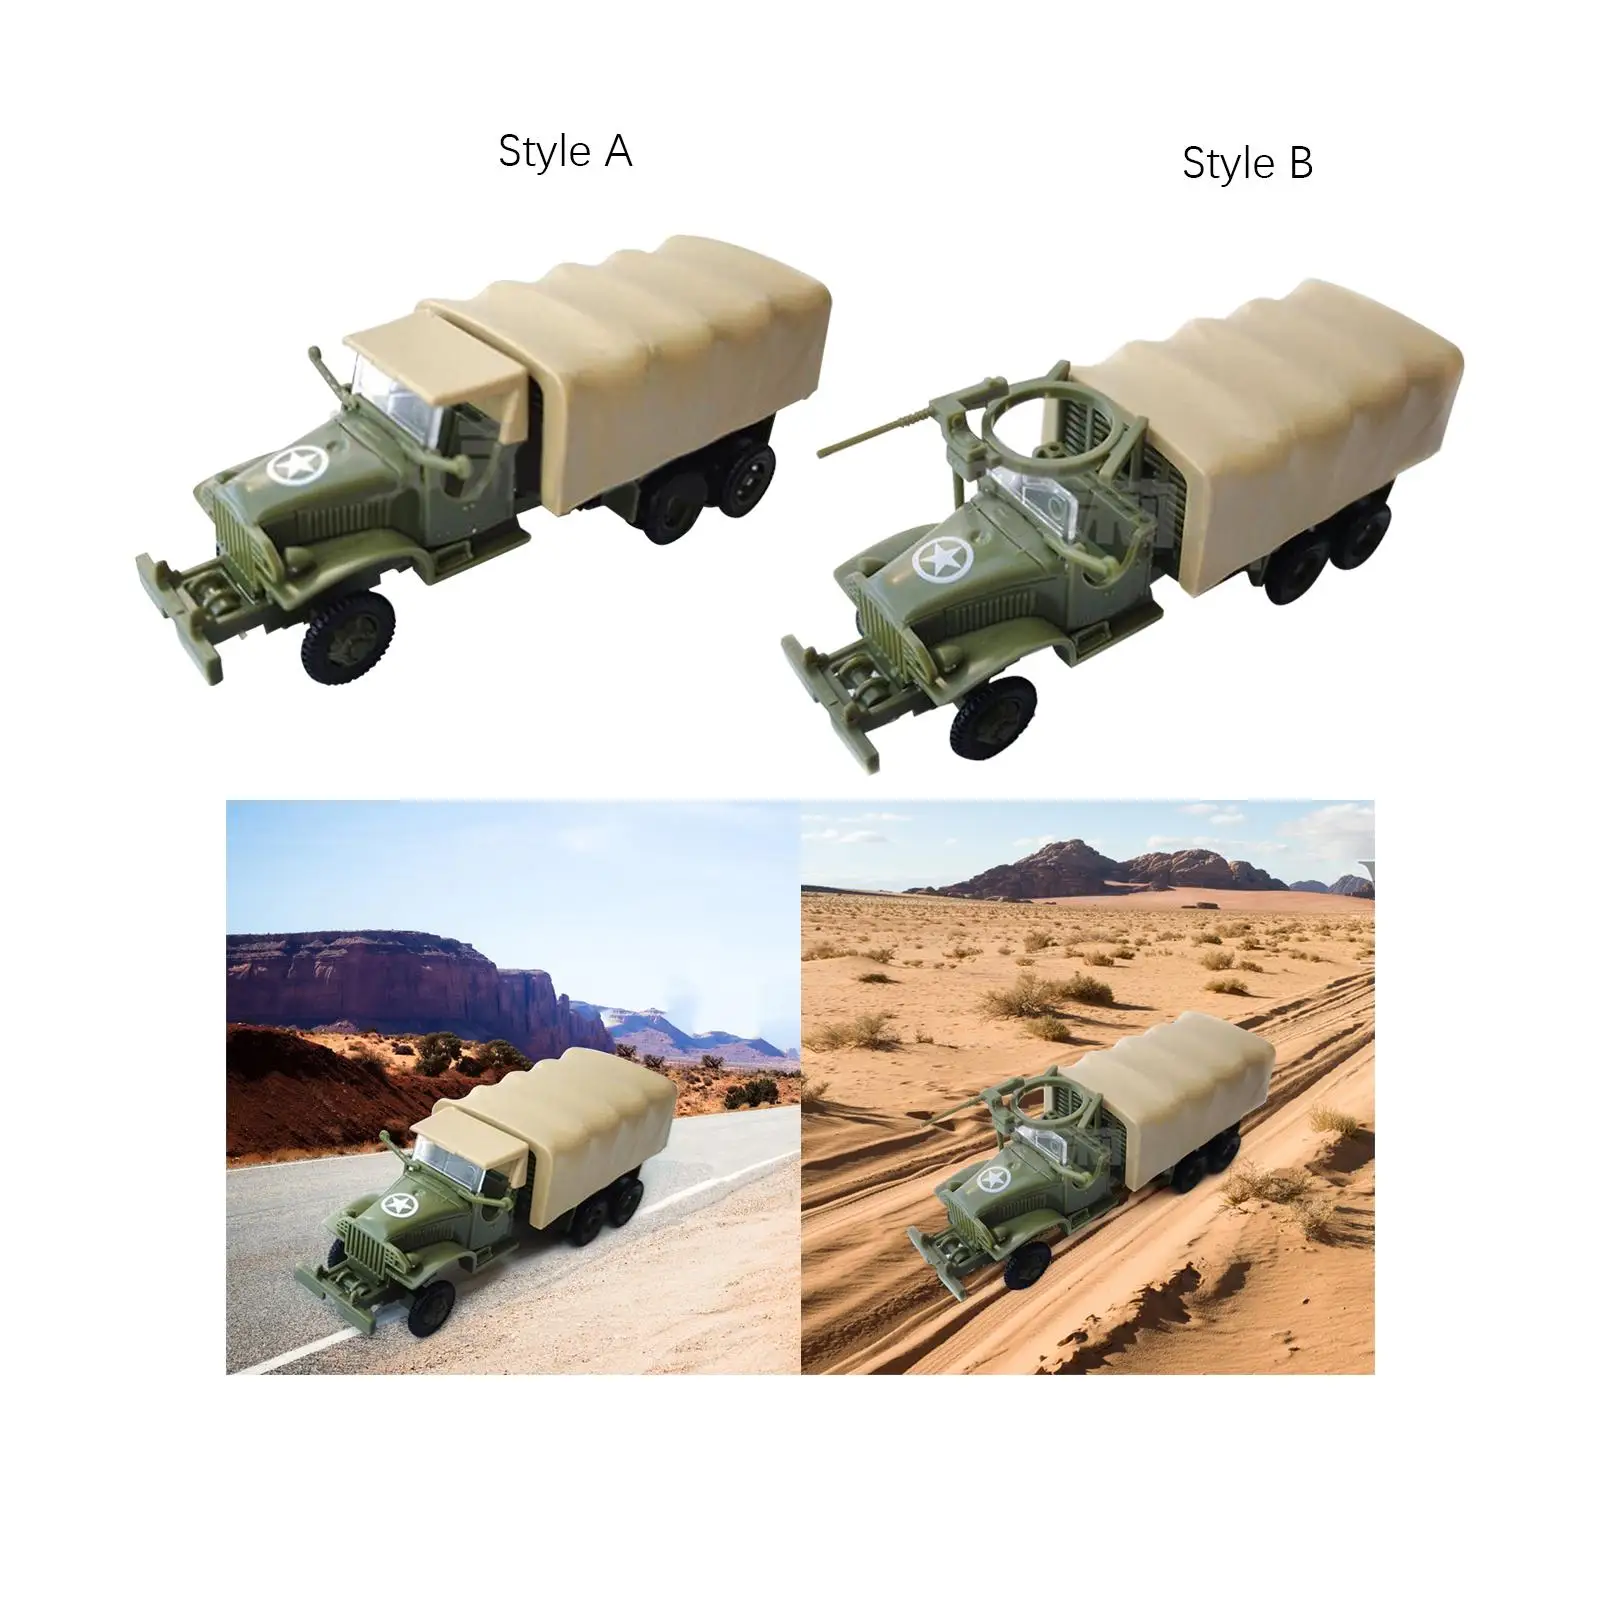 Simulation 1/72 Truck Model Kits Collections Puzzle Assembly Model Car Kits Building Model Kits for Gift Tabletop Decor Boys